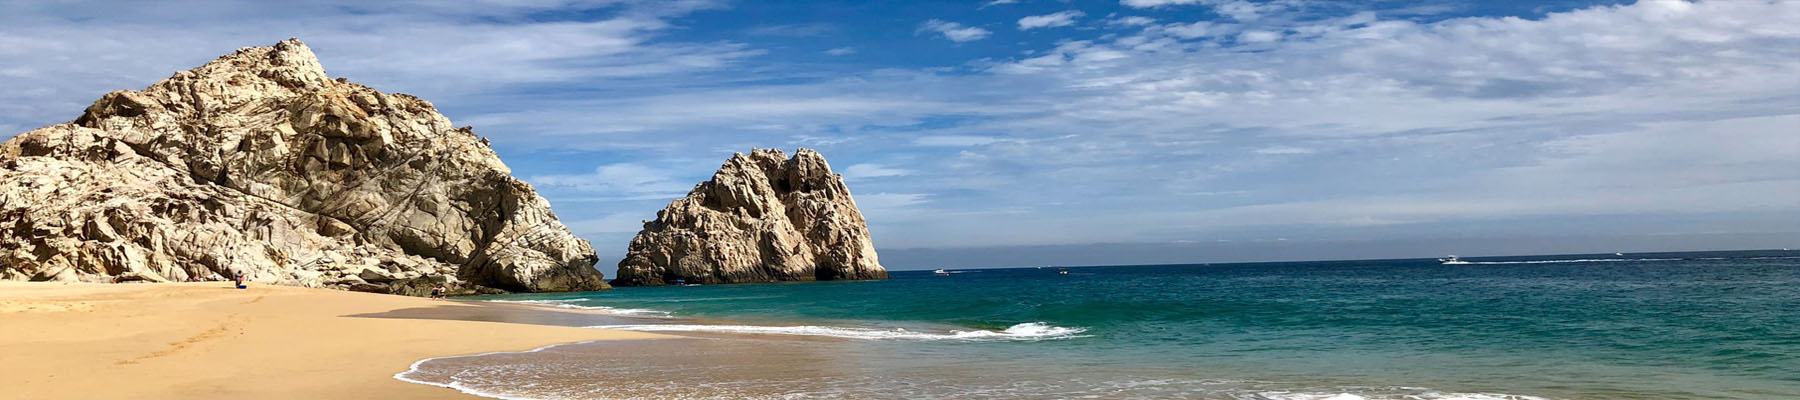 Picture of a beautiful beach in Cabo San Lucas, Mexico.  The picture shows tall rocks, a sandy beach, blue water and a blue sky with white clouds.